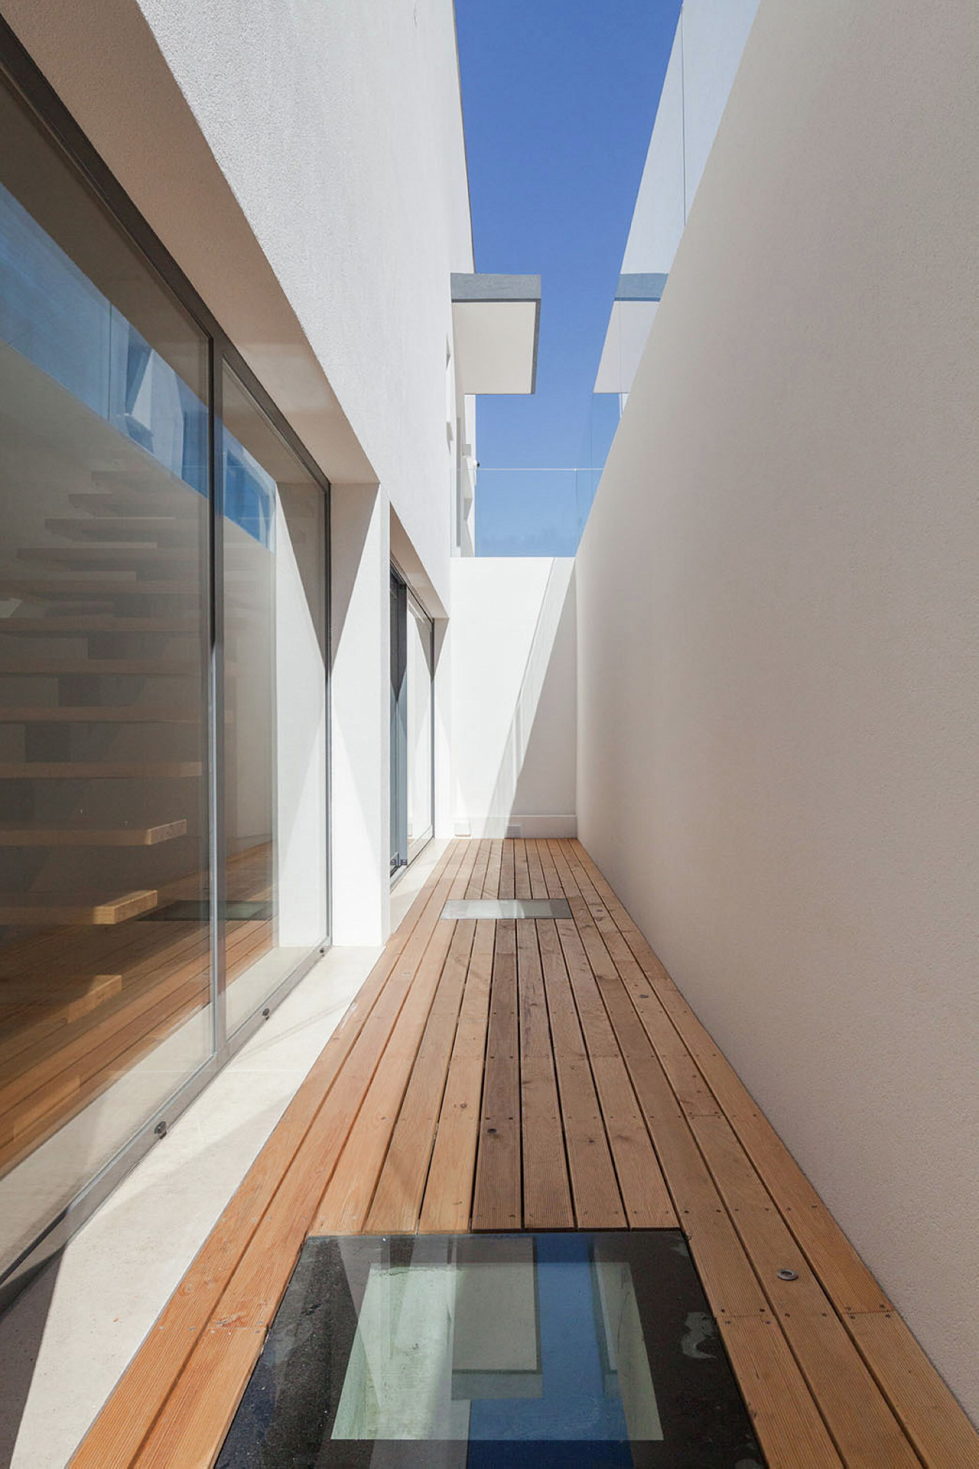 JC House Villa At The Suburb Of Lisbon, Portugal, Upon The Project Of JPS Atelier 17